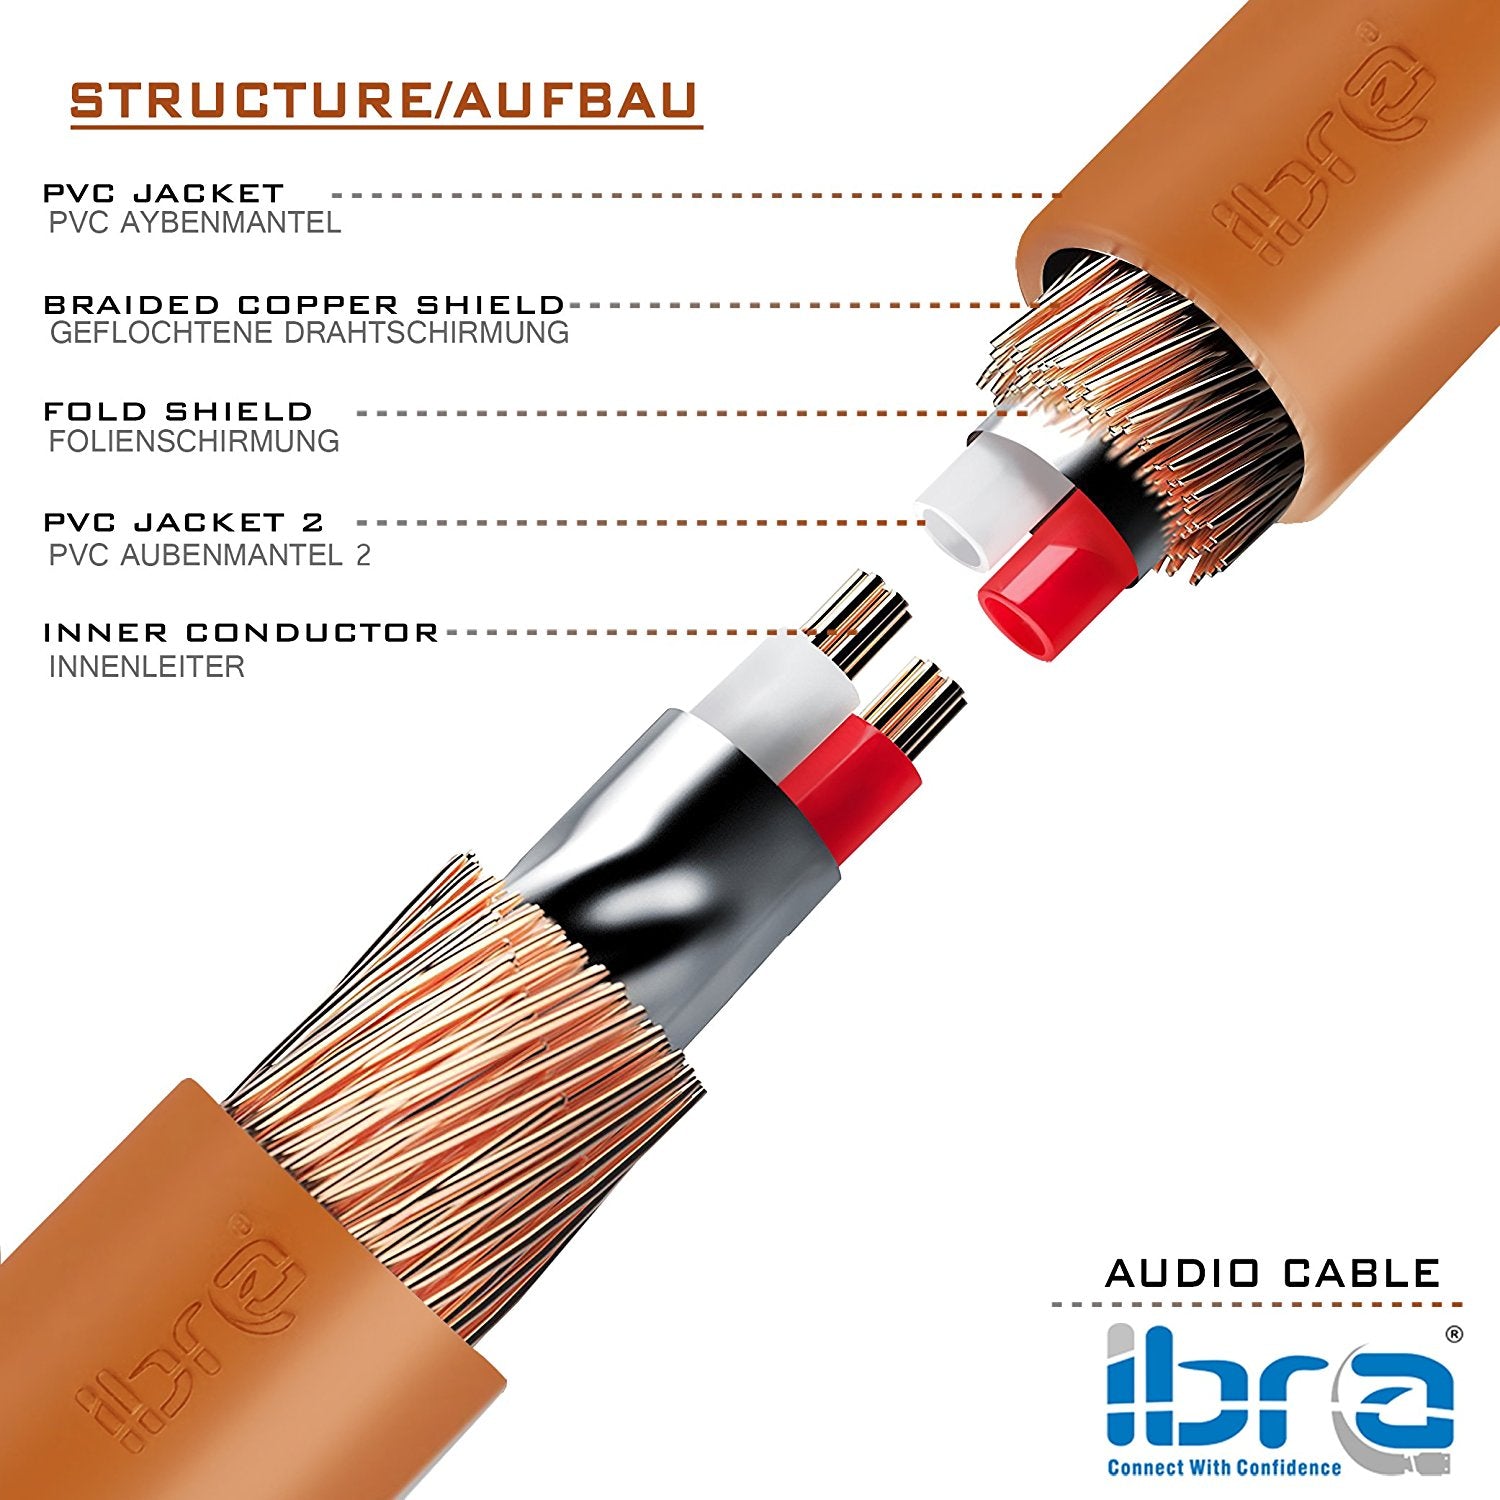 Aux Cable 2M 3.5mm Stereo Pro Auxiliary Audio Cable - for Beats Headphones Apple iPod iPhone iPad Samsung LG Smartphone MP3 Player Home / Car etc - IBRA Orange